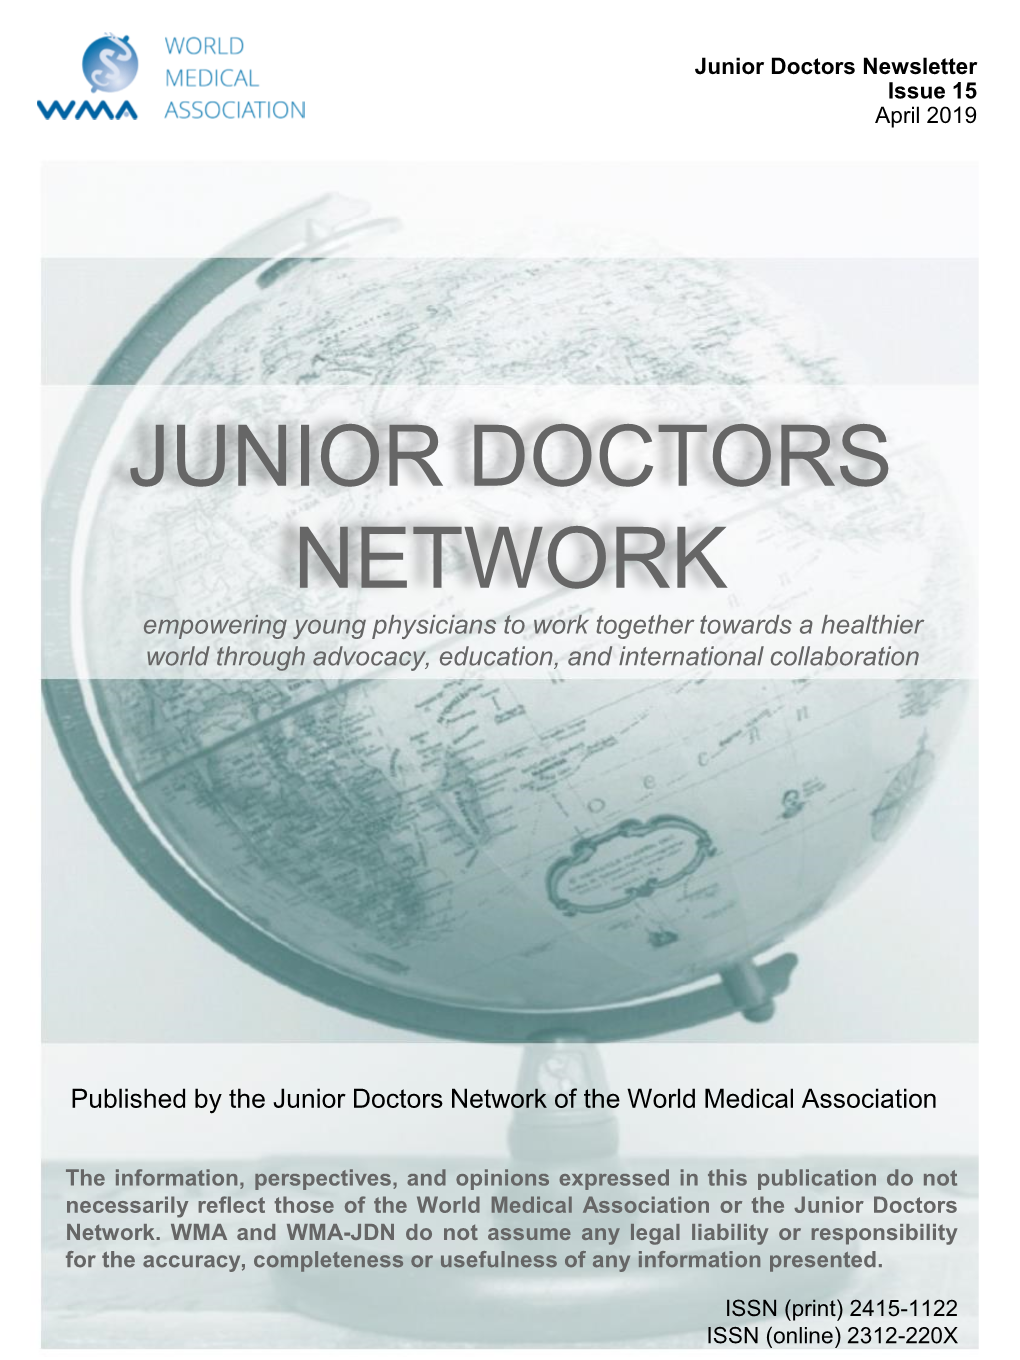 JUNIOR DOCTORS NETWORK Empowering Young Physicians to Work Together Towards a Healthier World Through Advocacy, Education, and International Collaboration